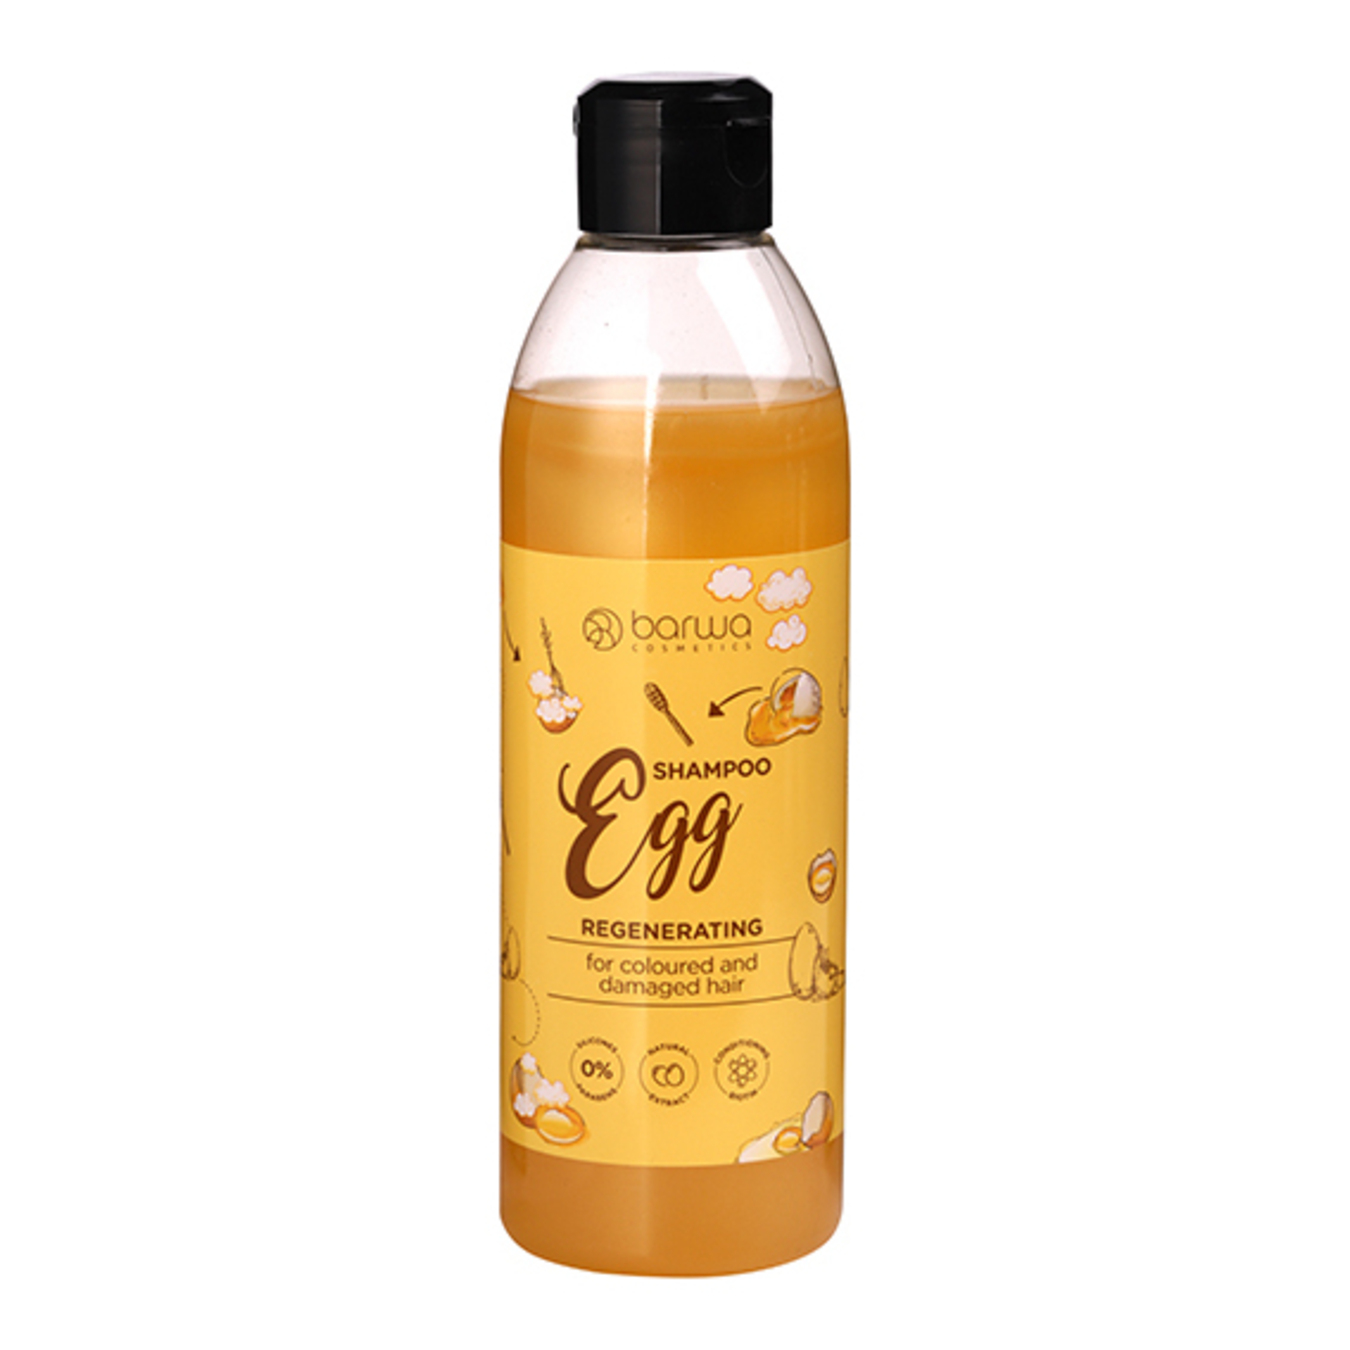 Shampoo Barwa Naturalna with Egg Extract and Vitamin Complex for Hair Restoration 300ml